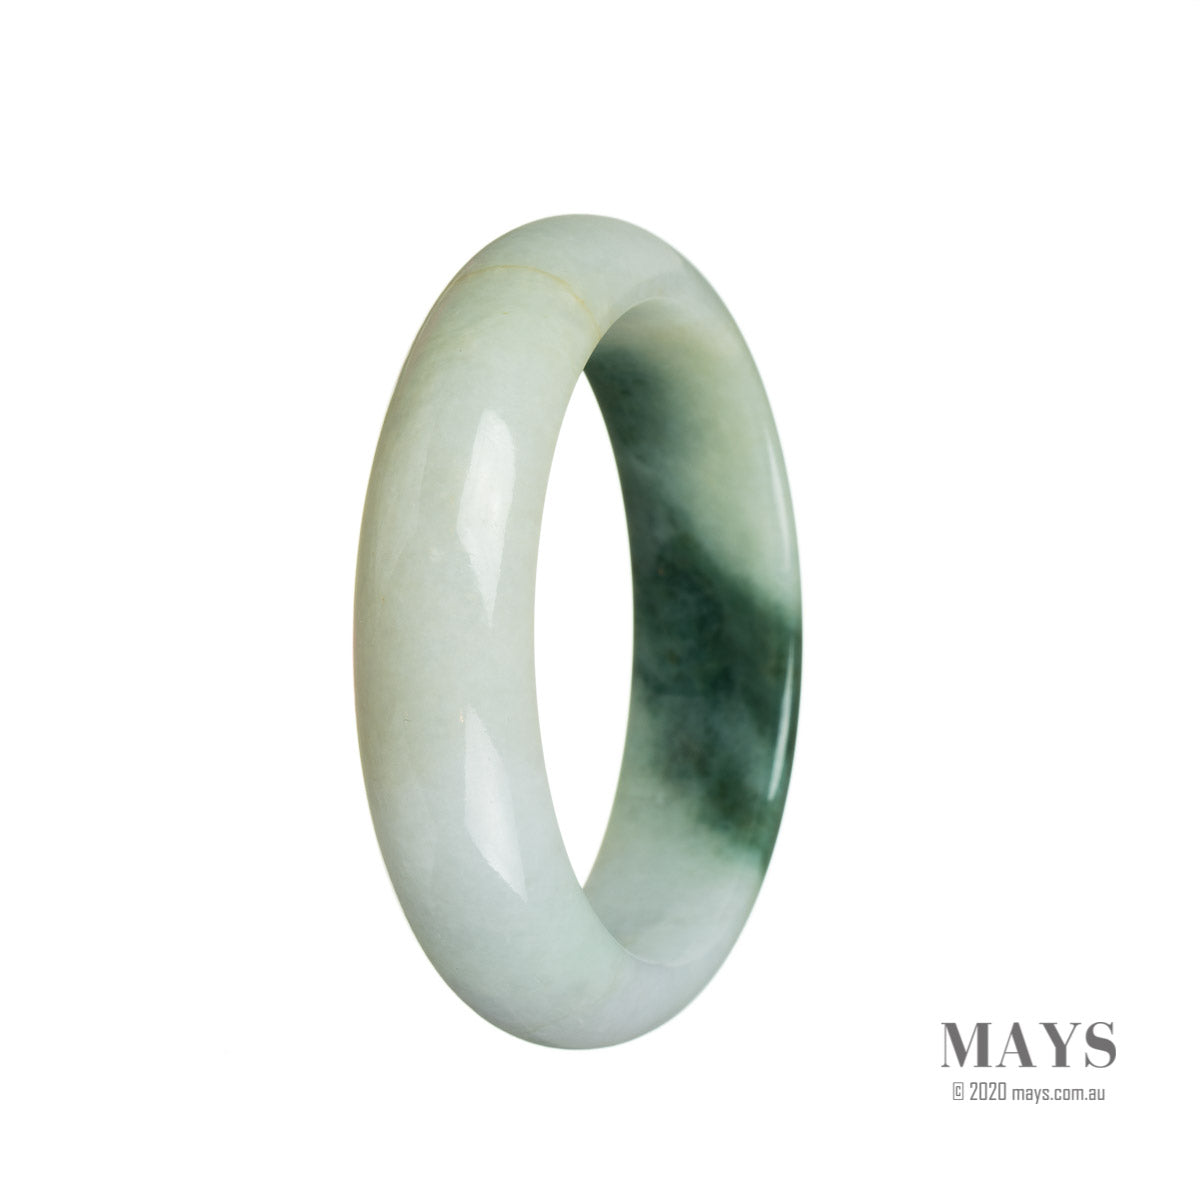 A half moon shaped, 52mm certified natural white flower jadeite jade bangle by MAYS.